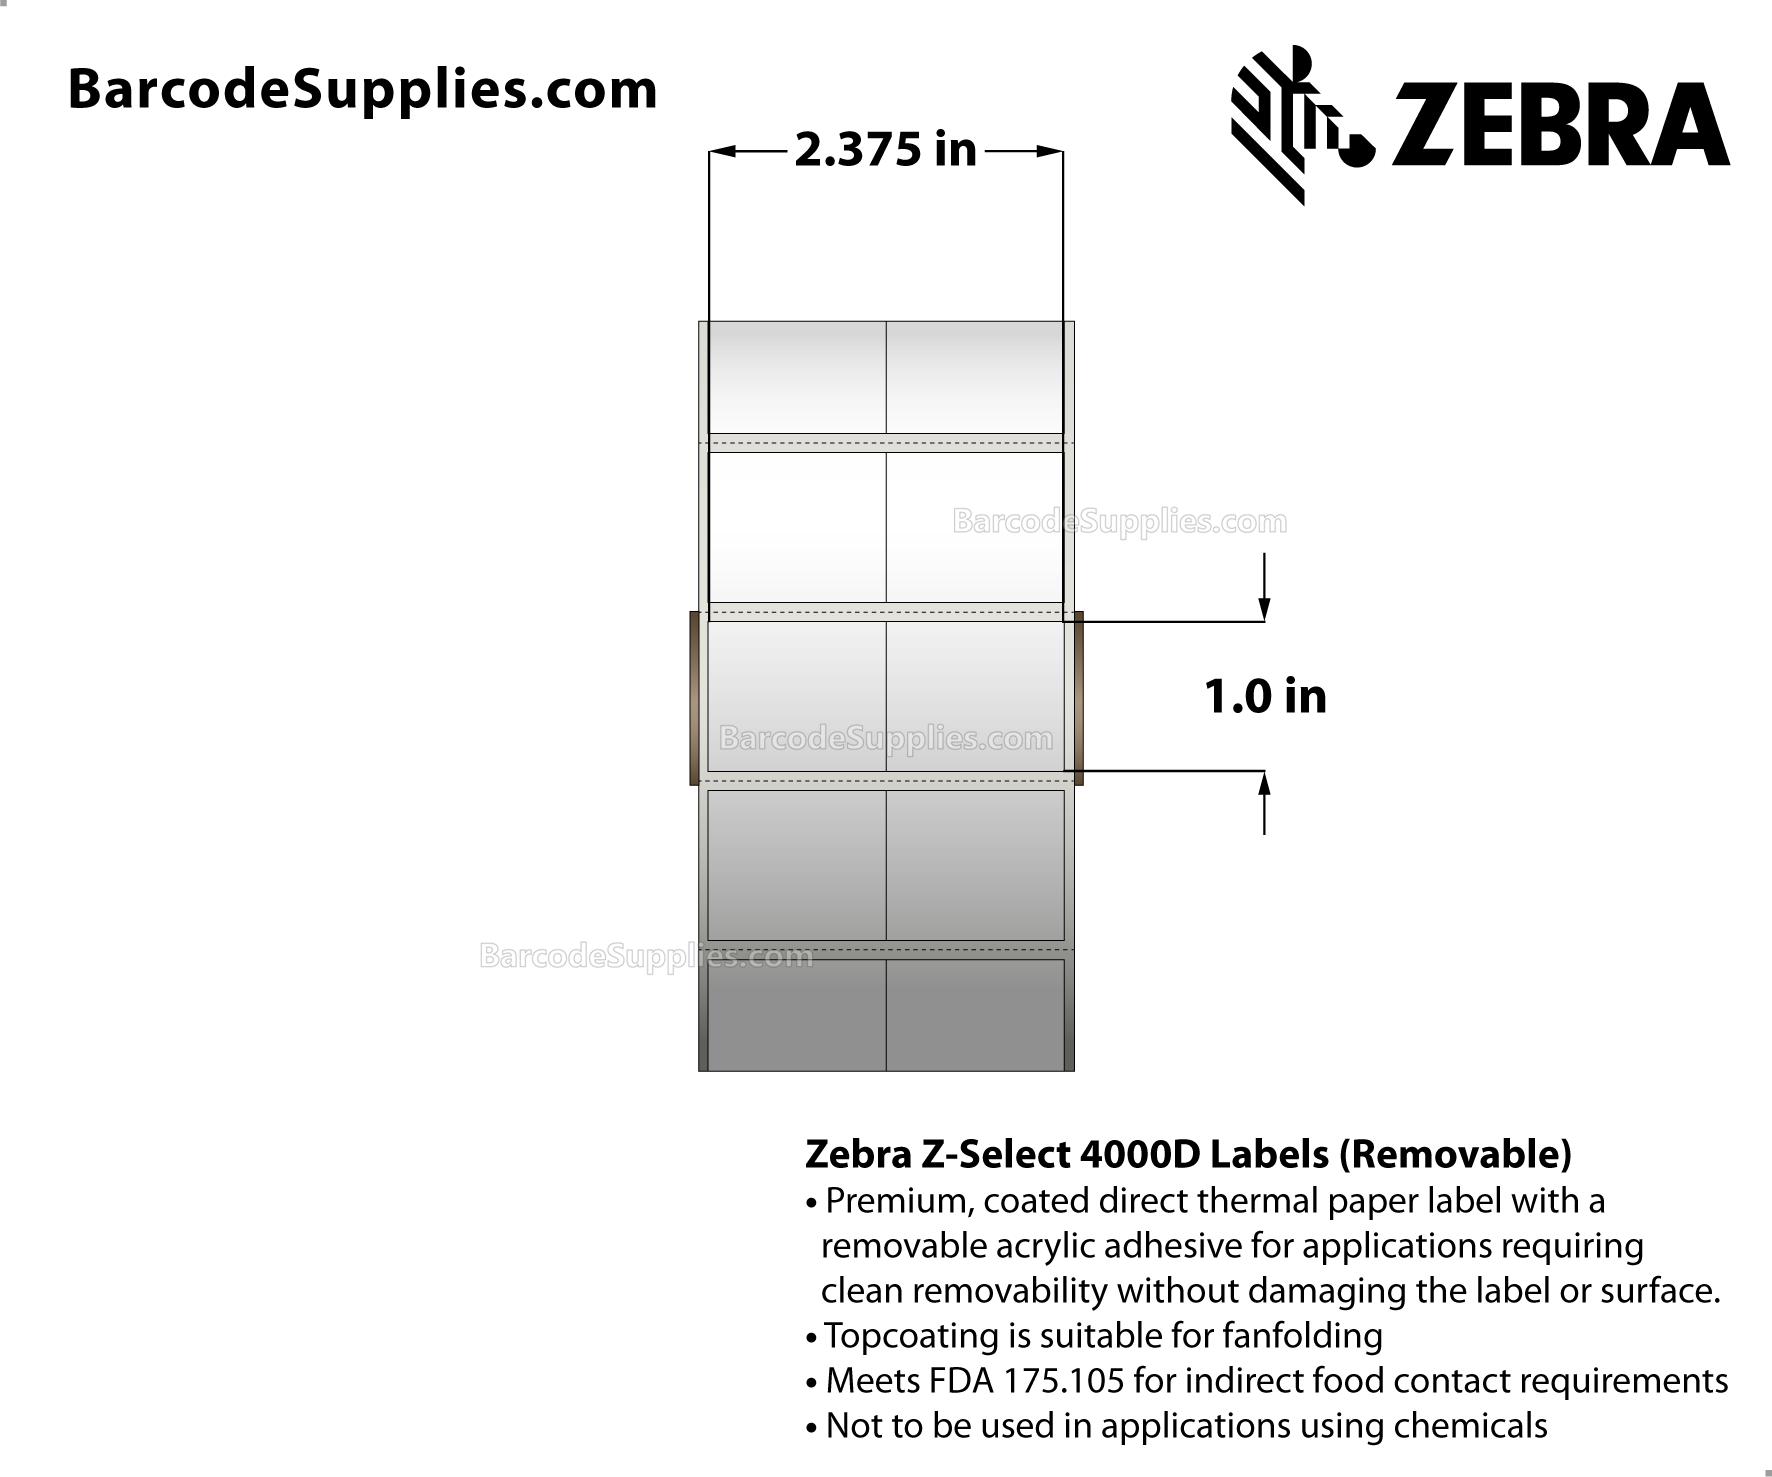 2.375 x 1 Direct Thermal White Z-Select 4000D Removable Labels With Removable Adhesive - Center vertical slit creating two 1.1875" x 1" labels - Perforated - 2260 Labels Per Roll - Carton Of 6 Rolls - 13560 Labels Total - MPN: 10010052